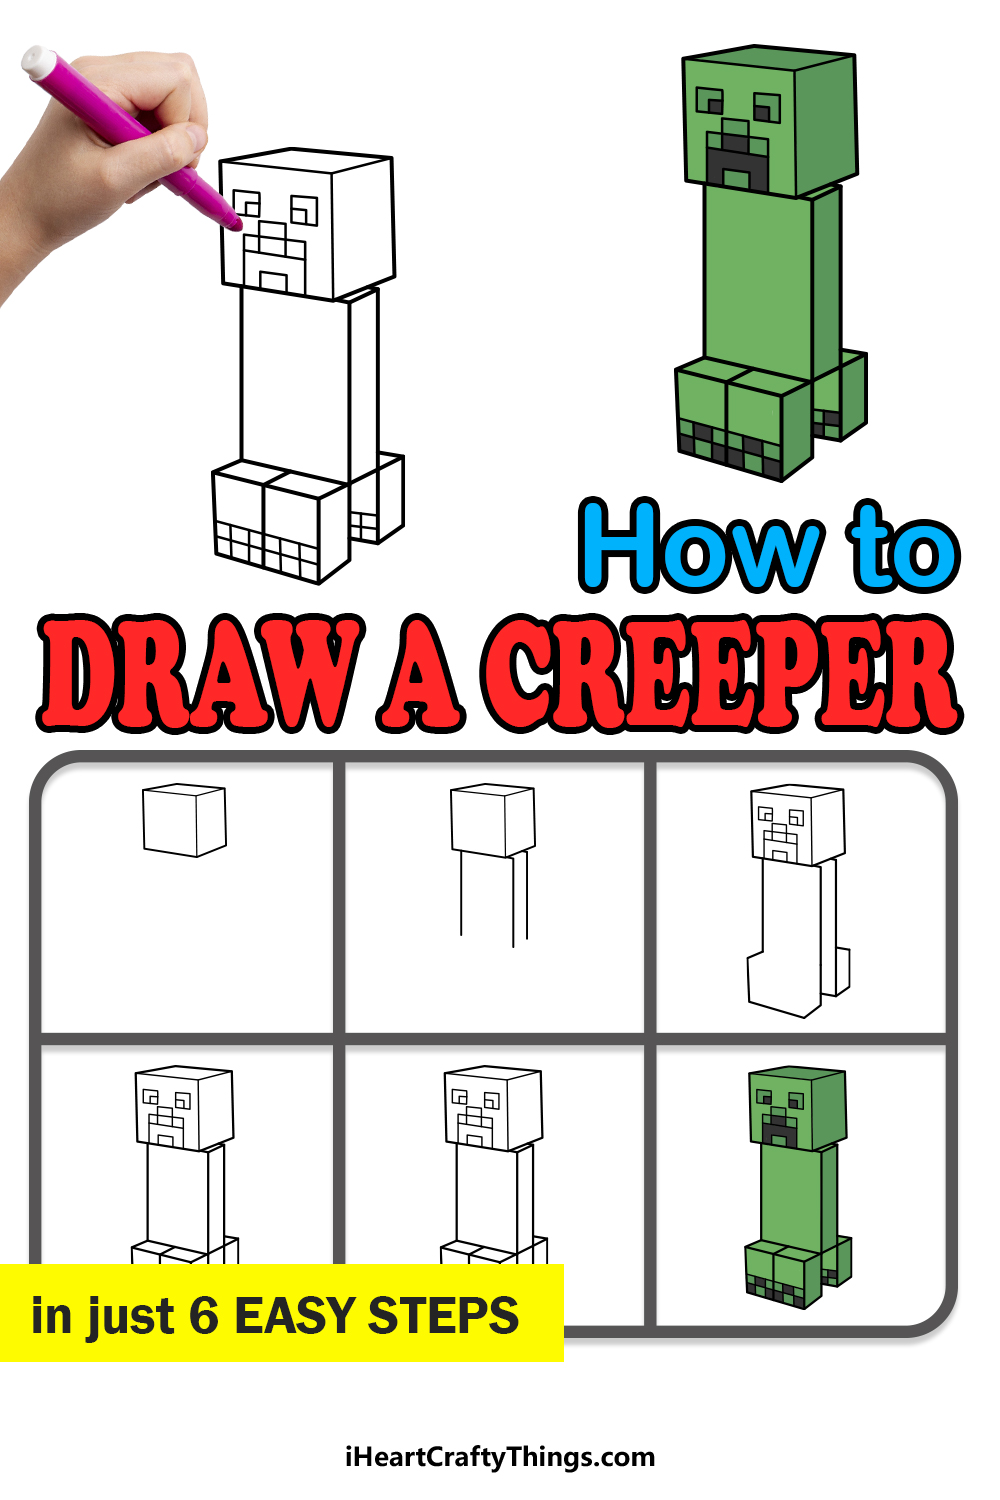 how to draw a creeper in 6 easy steps